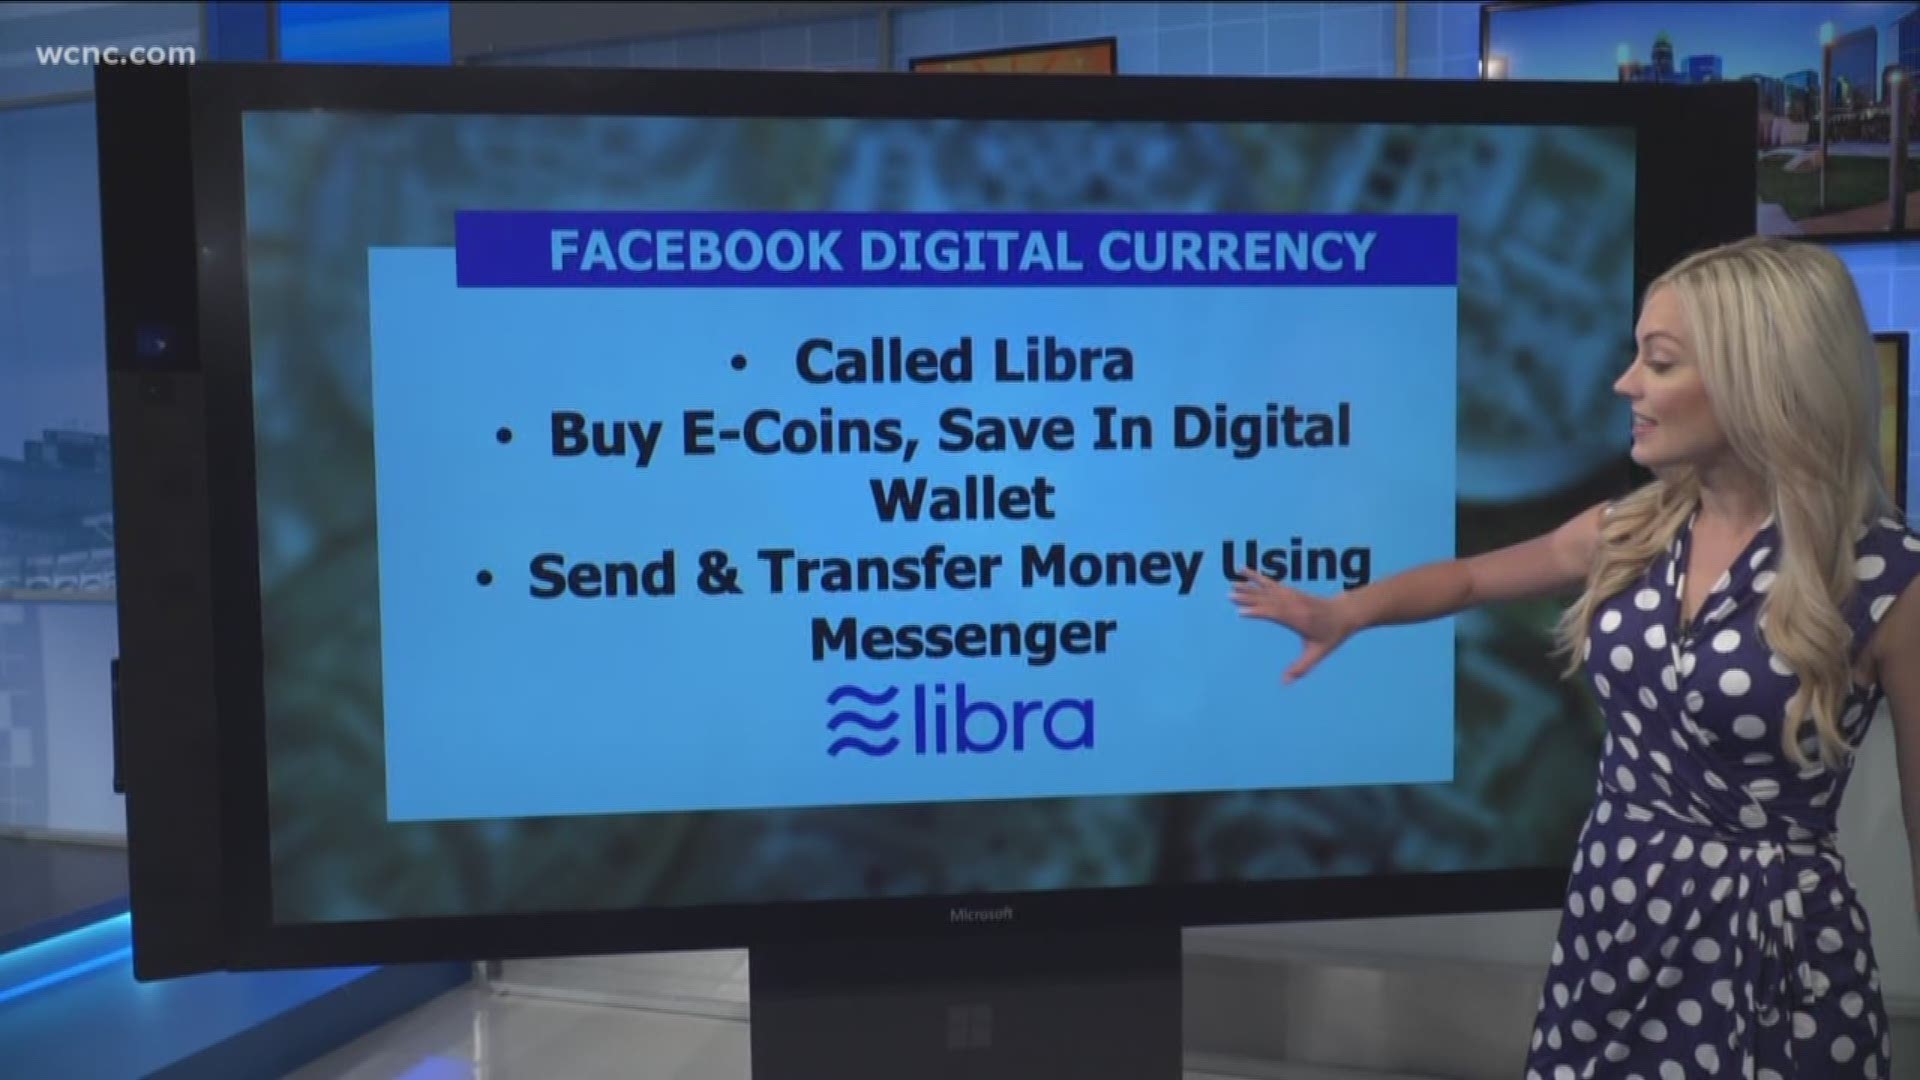 This week, Facebook announced plans to launch their own digital currency system similar to Bitcoin and Venmo. Users would purchase e-coins that could be transferred to other users internationally and without foreign exchange rates.